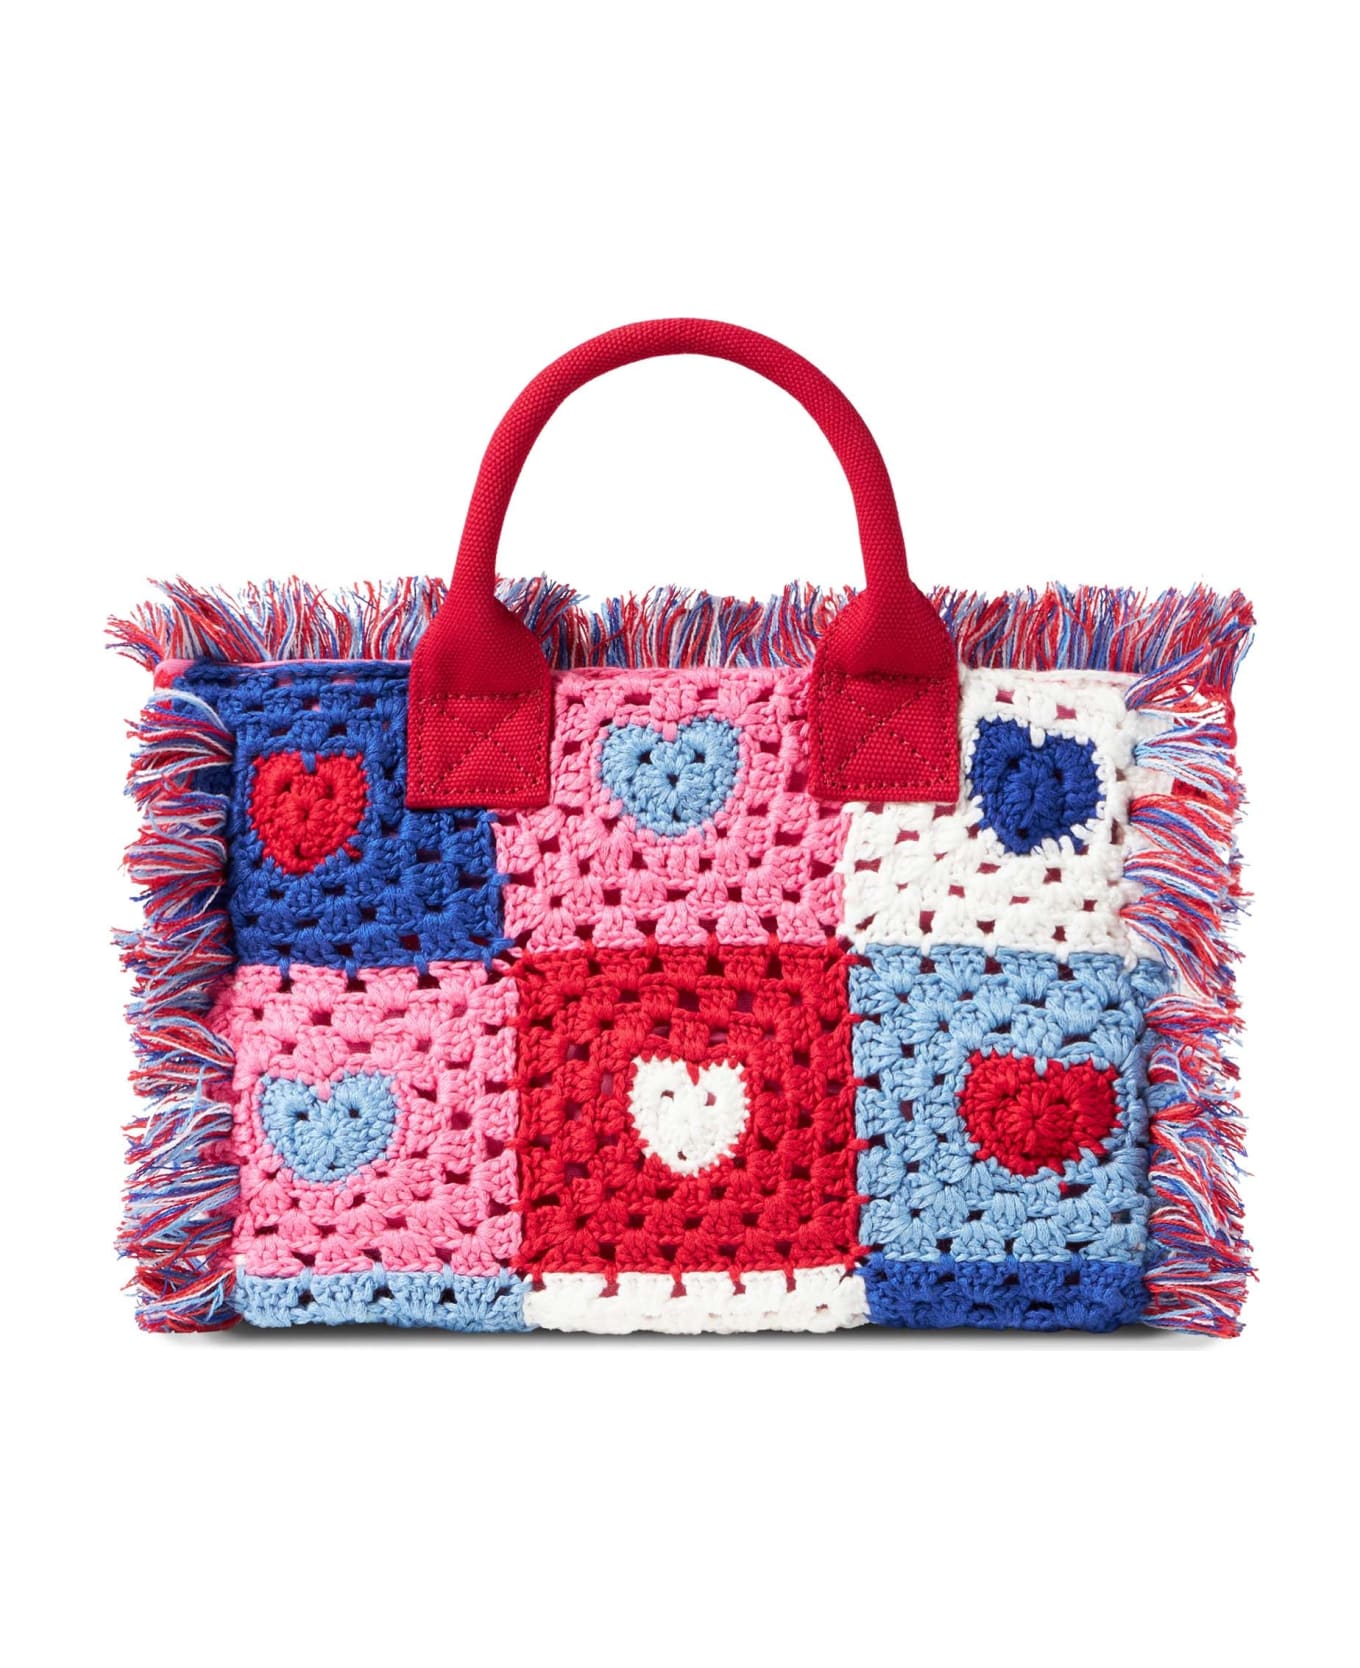 MC2 Saint Barth Colette Handbag With Crochet Heart Patches - RED